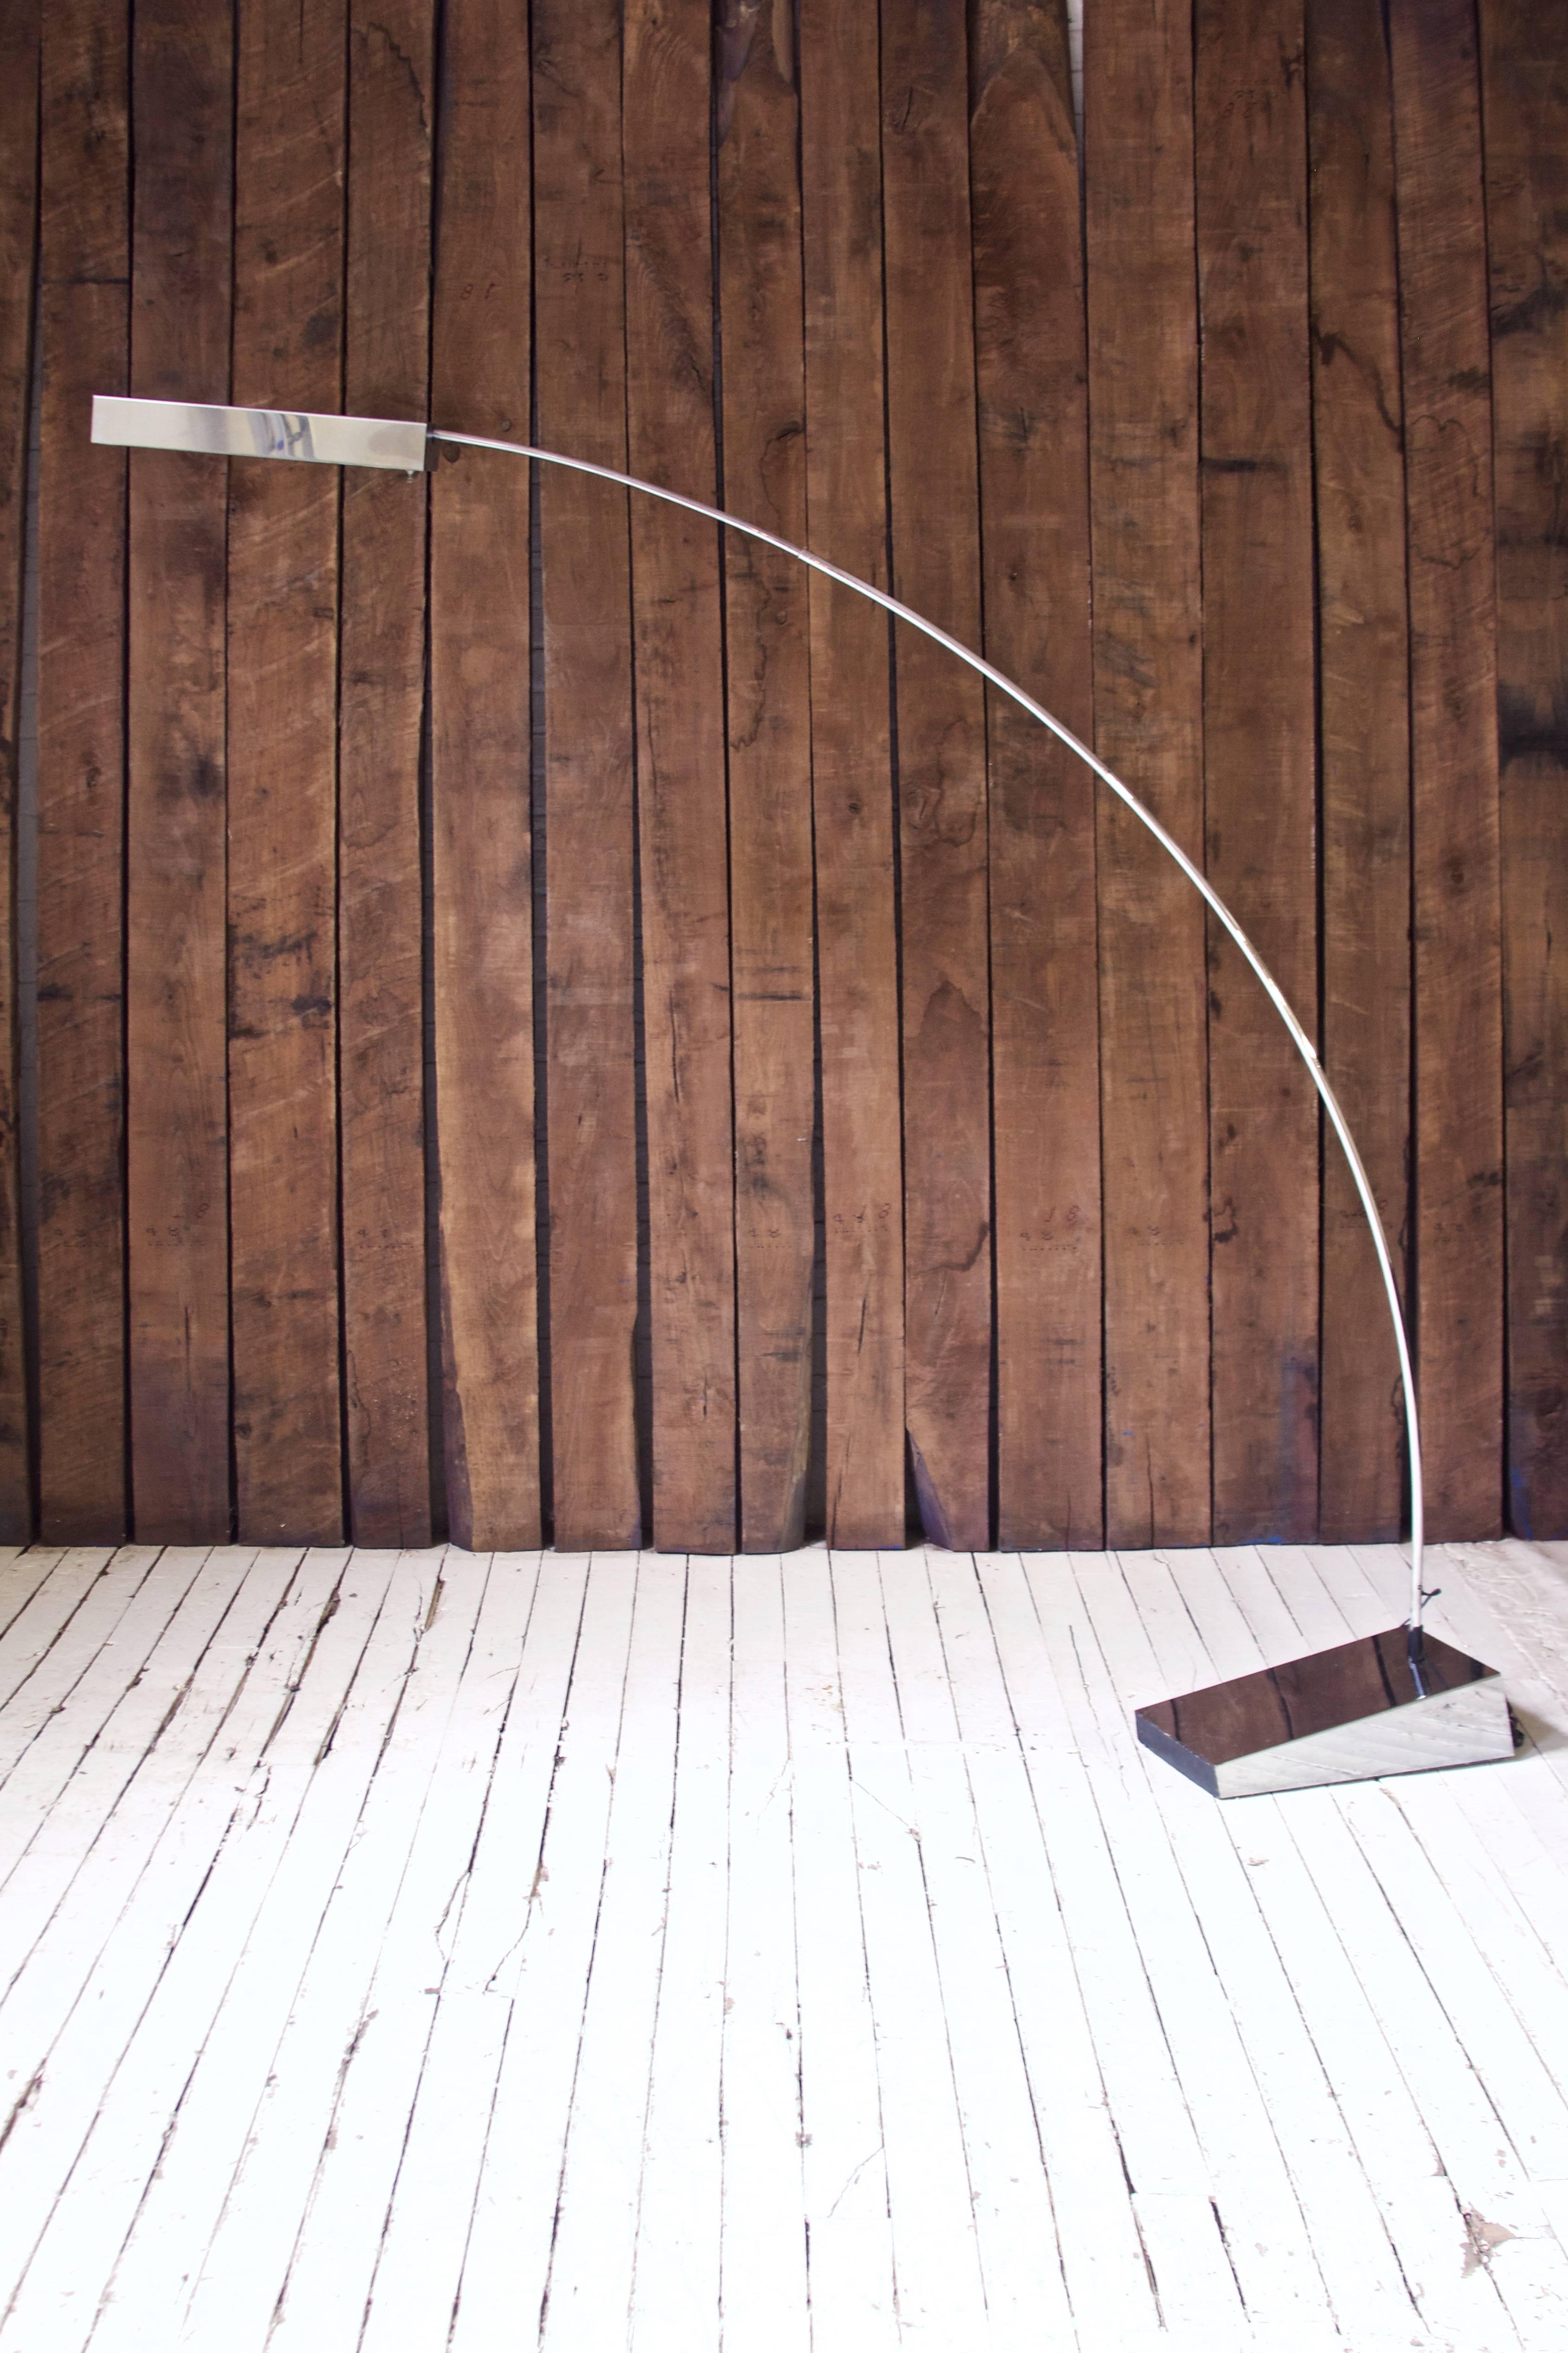 This vintage signed Arc floor lamp by Robert Sonneman is a great example of the timeless style of one of the most prolific and influential creators of 20th century lighting design. This particular piece features a telescopic arm which mounts to the